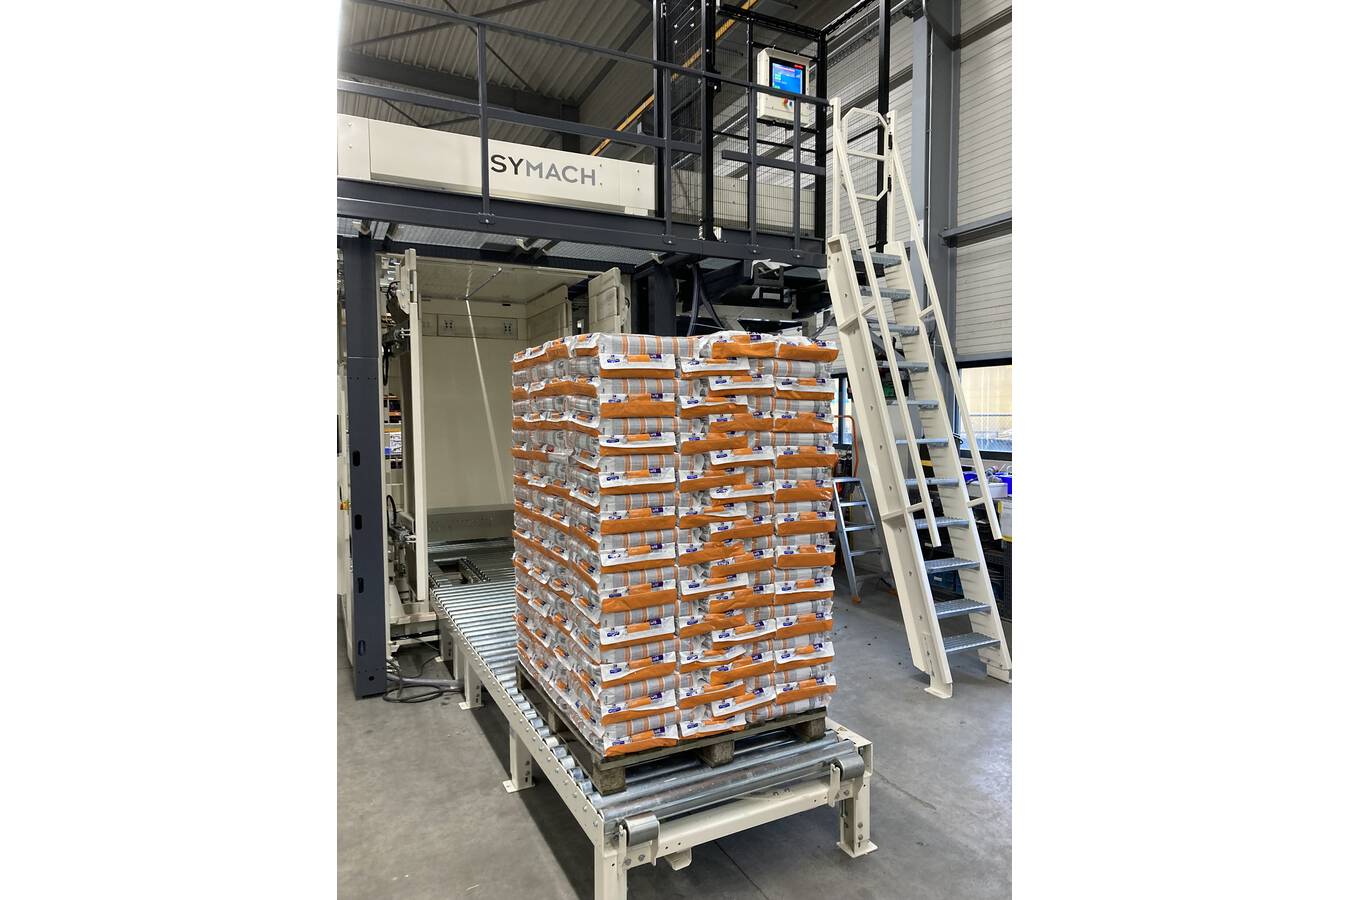 The brand-new SYMACH 3500S Palletizer The new 3500S conventional push-type palletizer offers efficient and high-speed palletizing capabilities with superior stacking results using intuitive controls